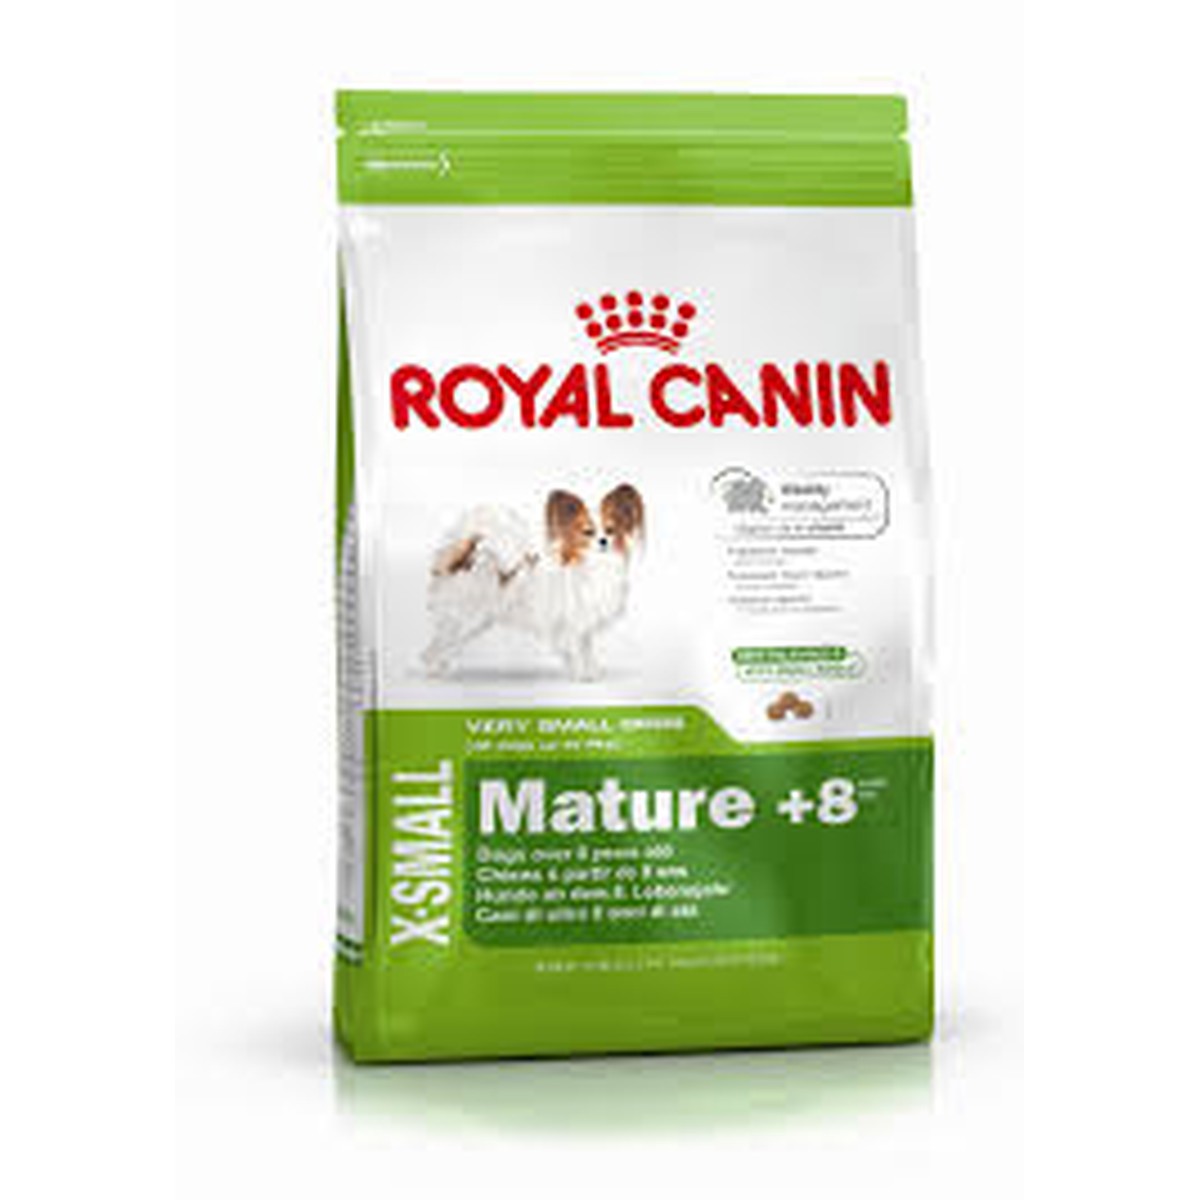 Royal Canin  X-Small Adult 8+ 500 g  500 g